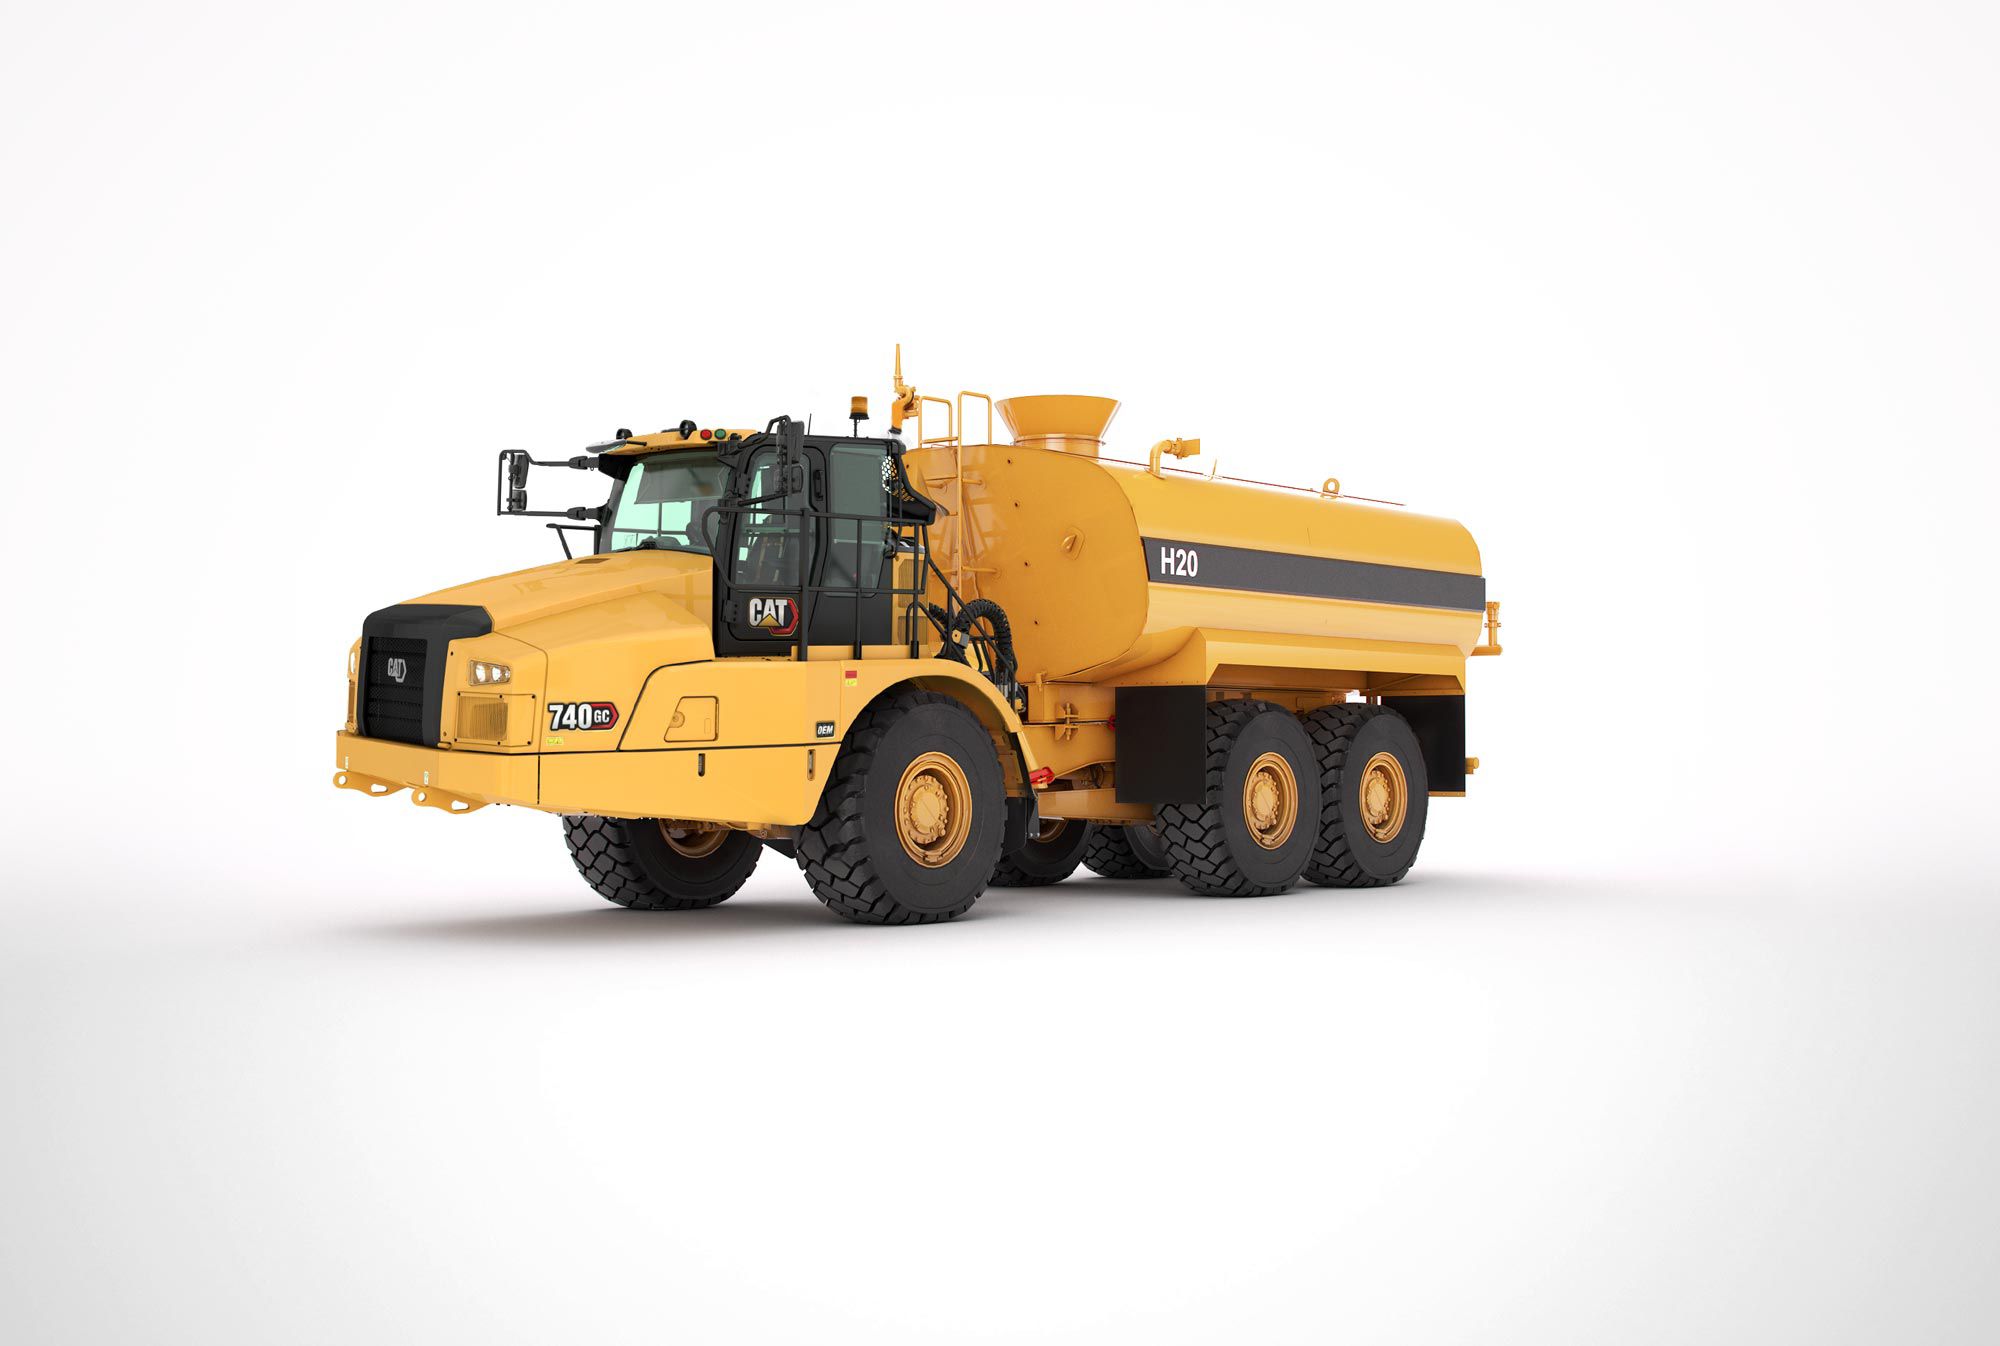 Cat 740 GC articulated truck bare chassis, Cat